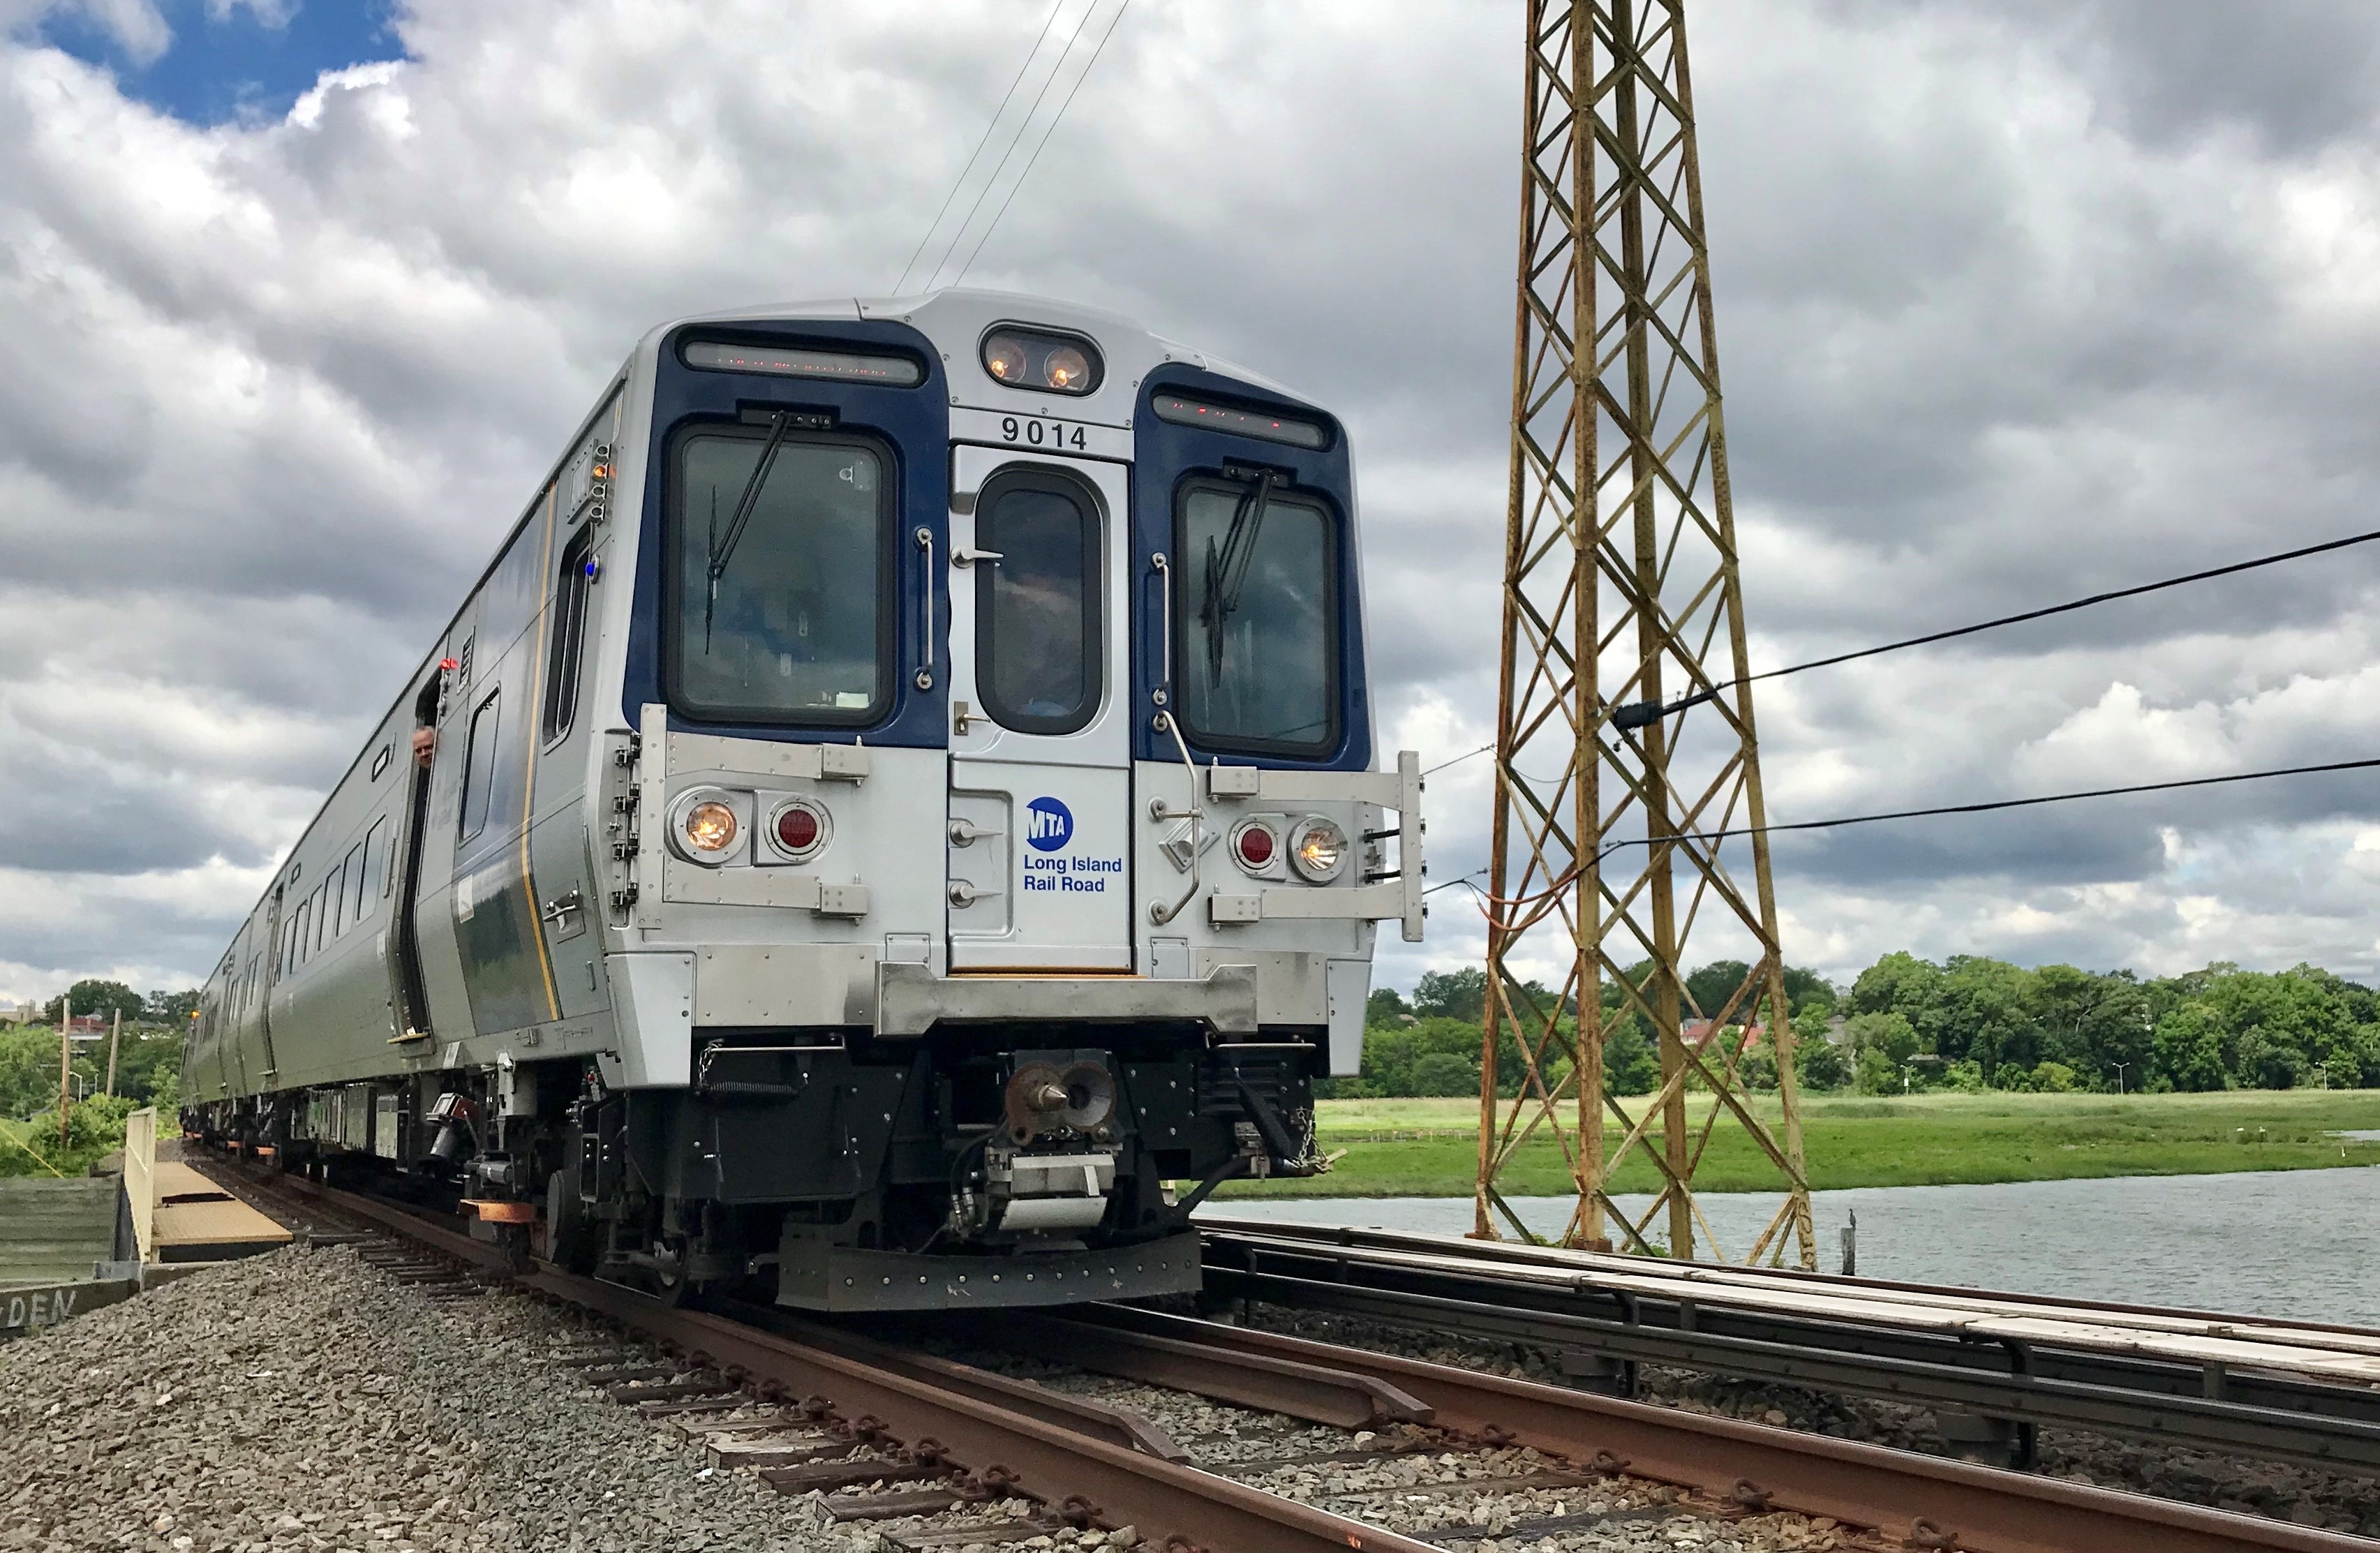 August 28: Buses Replace Trains between Far Rockaway and Valley Stream